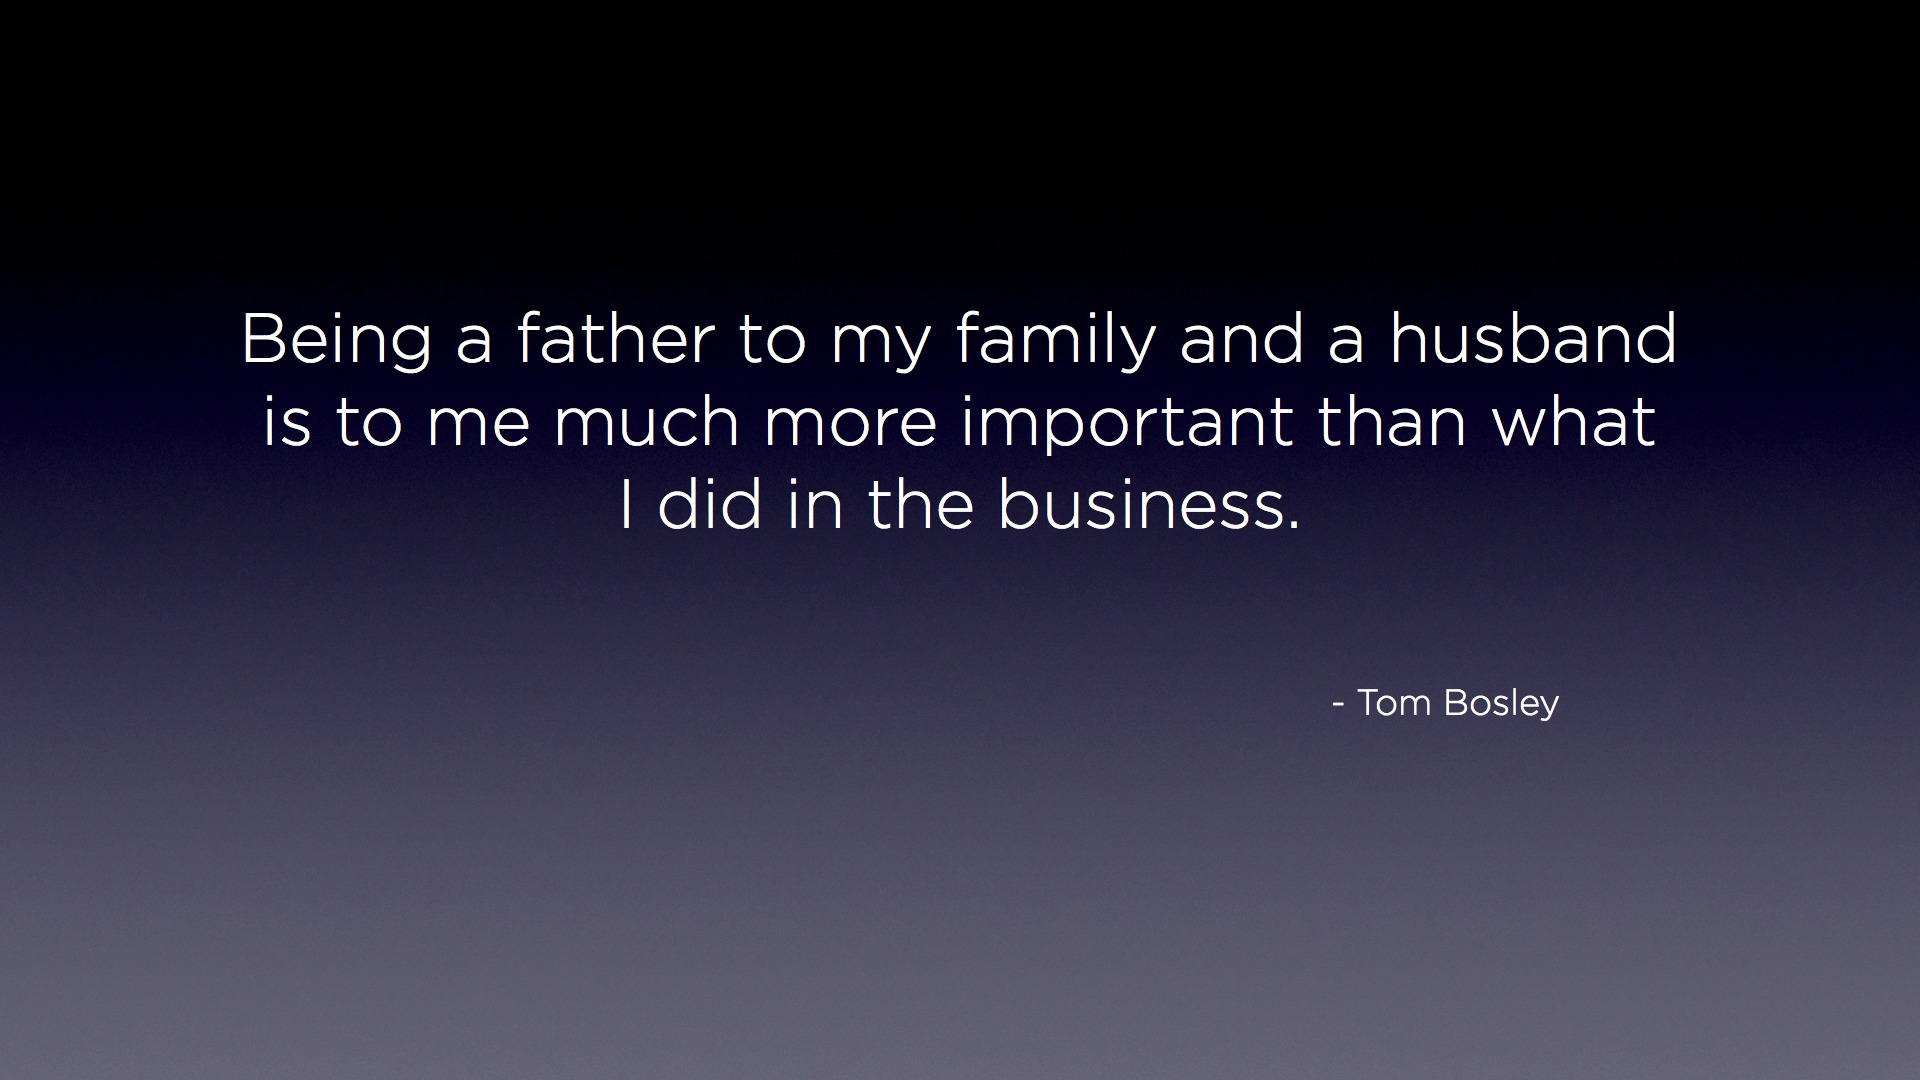 Being a father to my family and a husband is to me much more important than what I did in the business. - Tom Bosley